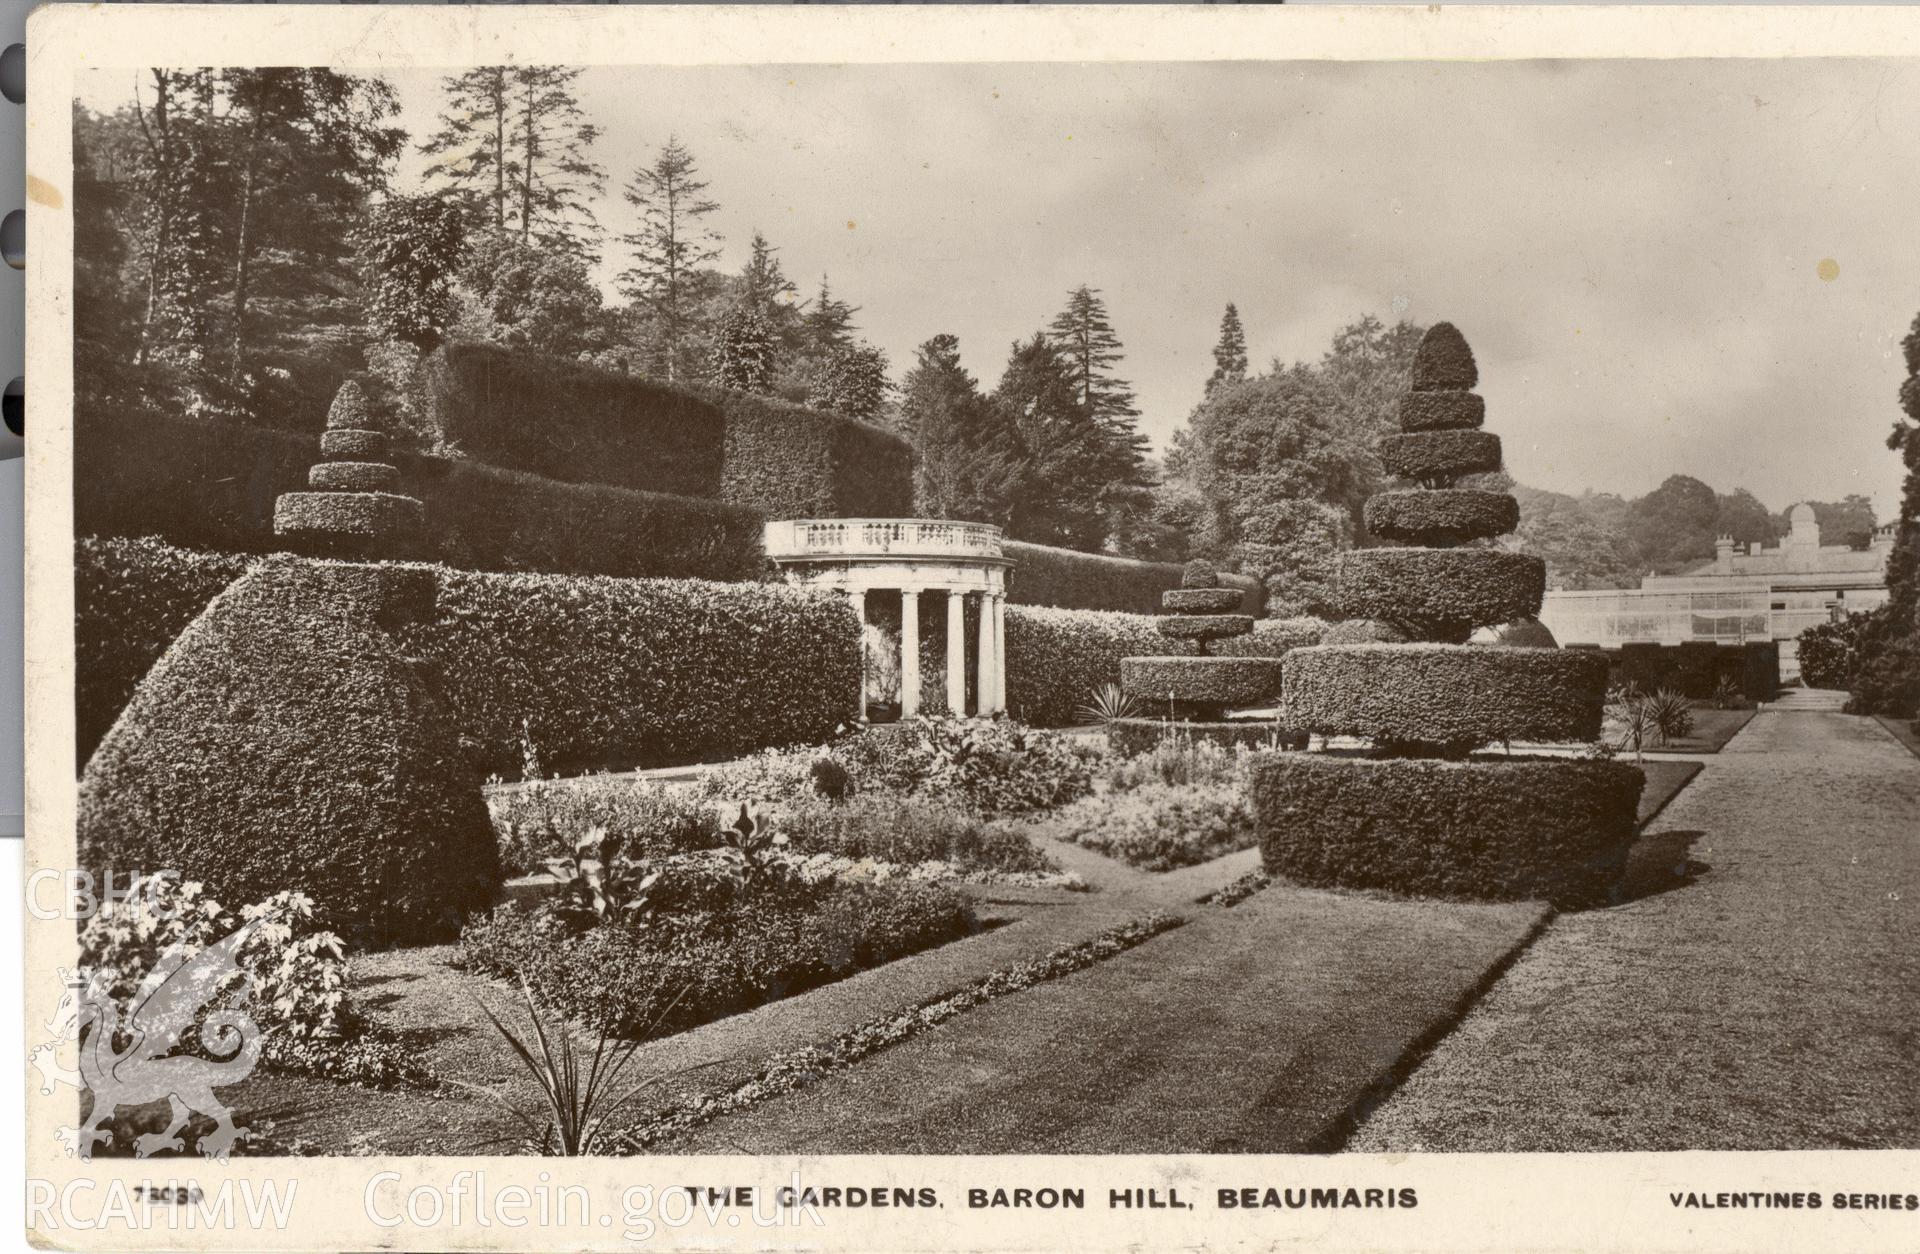 Digitised postcard image of Baron Hill Gardens, Beaumaris, Valentine's Series. Produced by Parks and Gardens Data Services, from an original item in the Peter Davis Collection at Parks and Gardens UK. We hold only web-resolution images of this collection, suitable for viewing on screen and for research purposes only. We do not hold the original images, or publication quality scans.